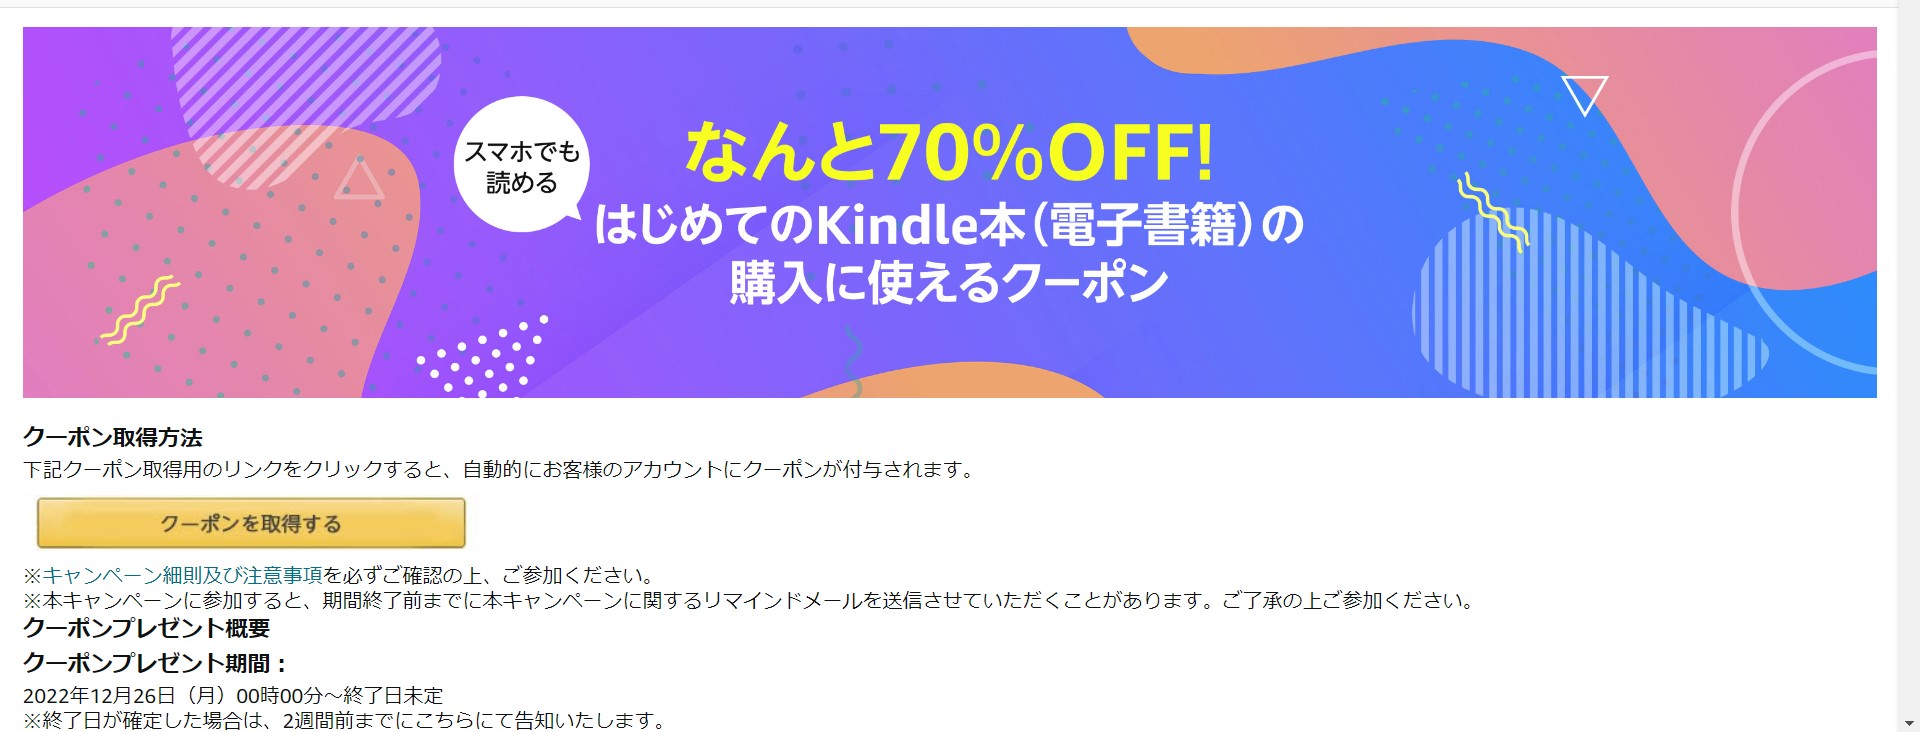 【Amazon】Kindleストアの初回割引クーポンの詳細